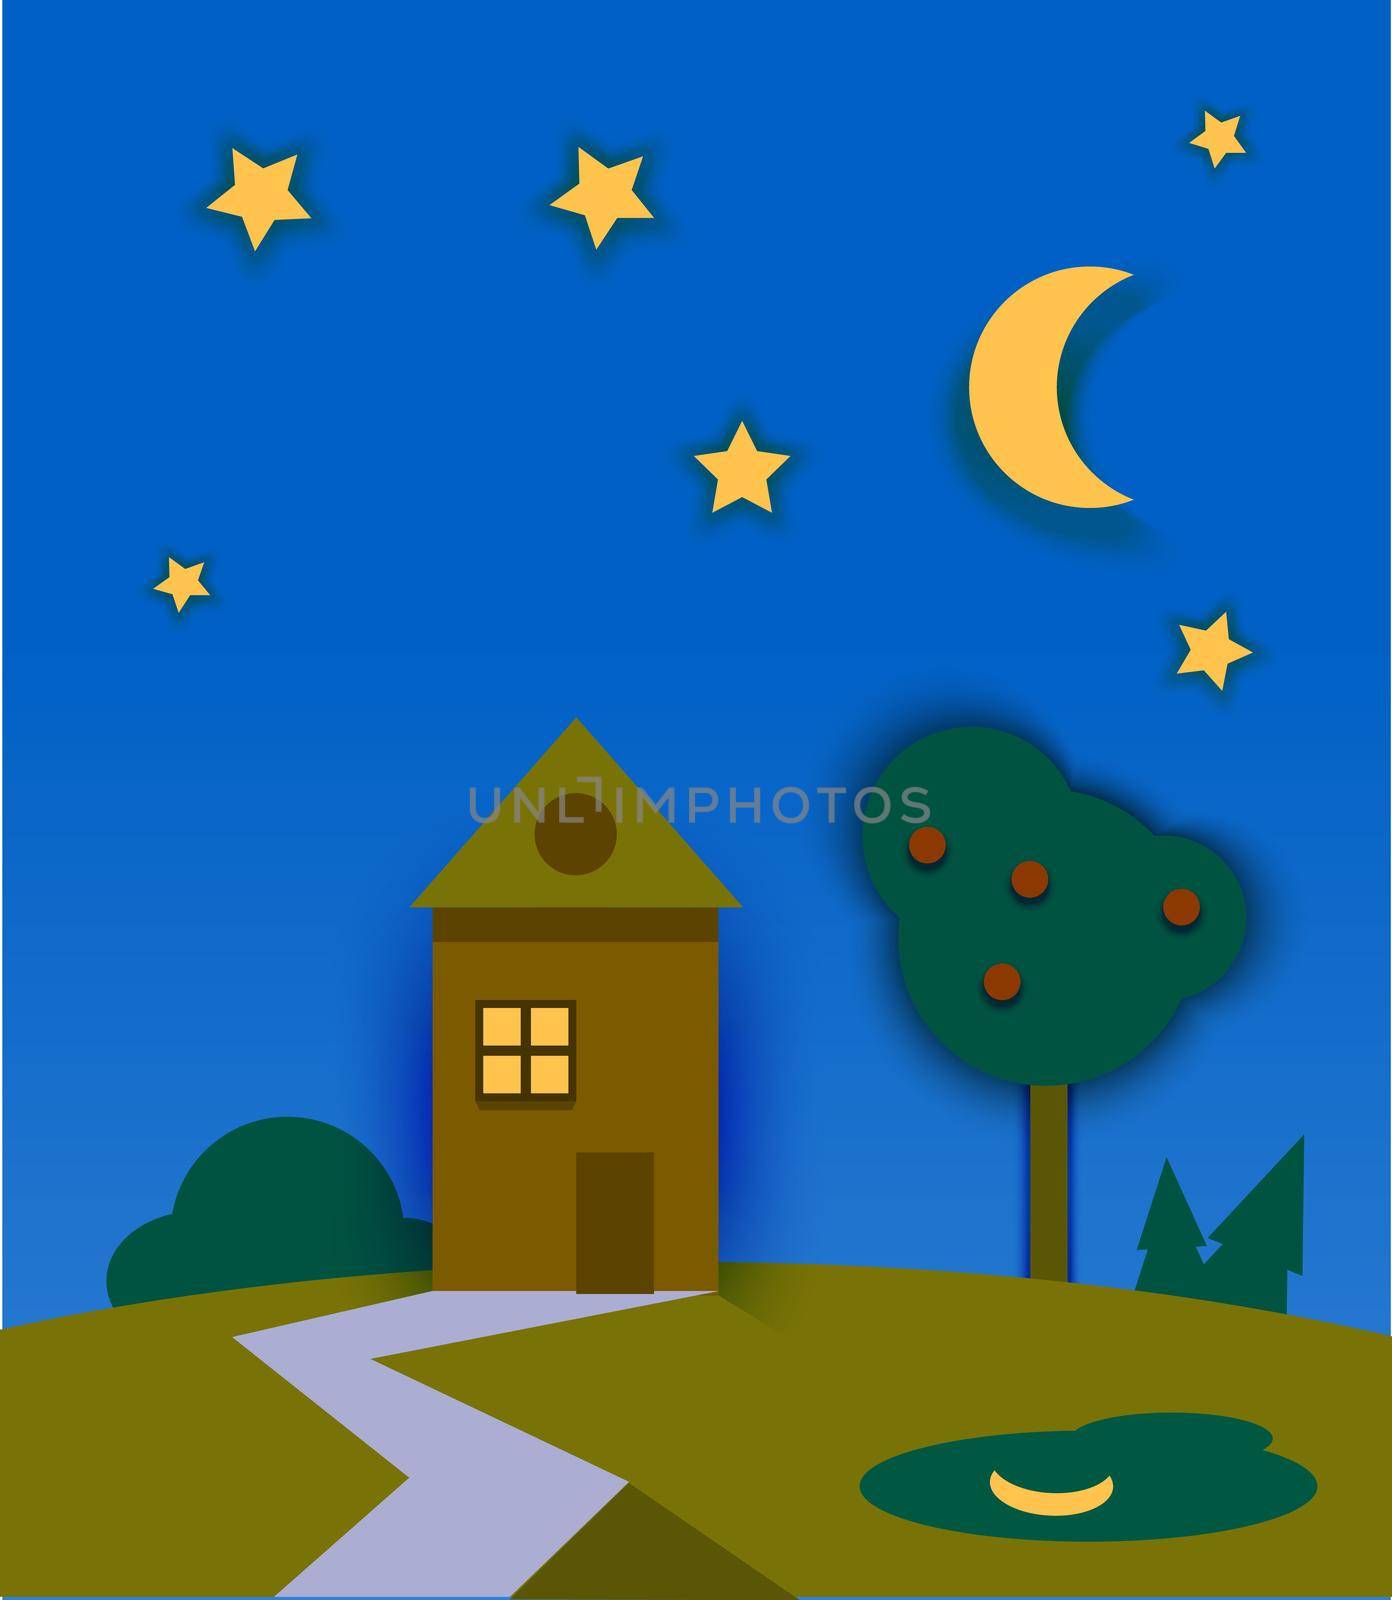 Night time nature landscape with house, moon and stars. by Alxyzt